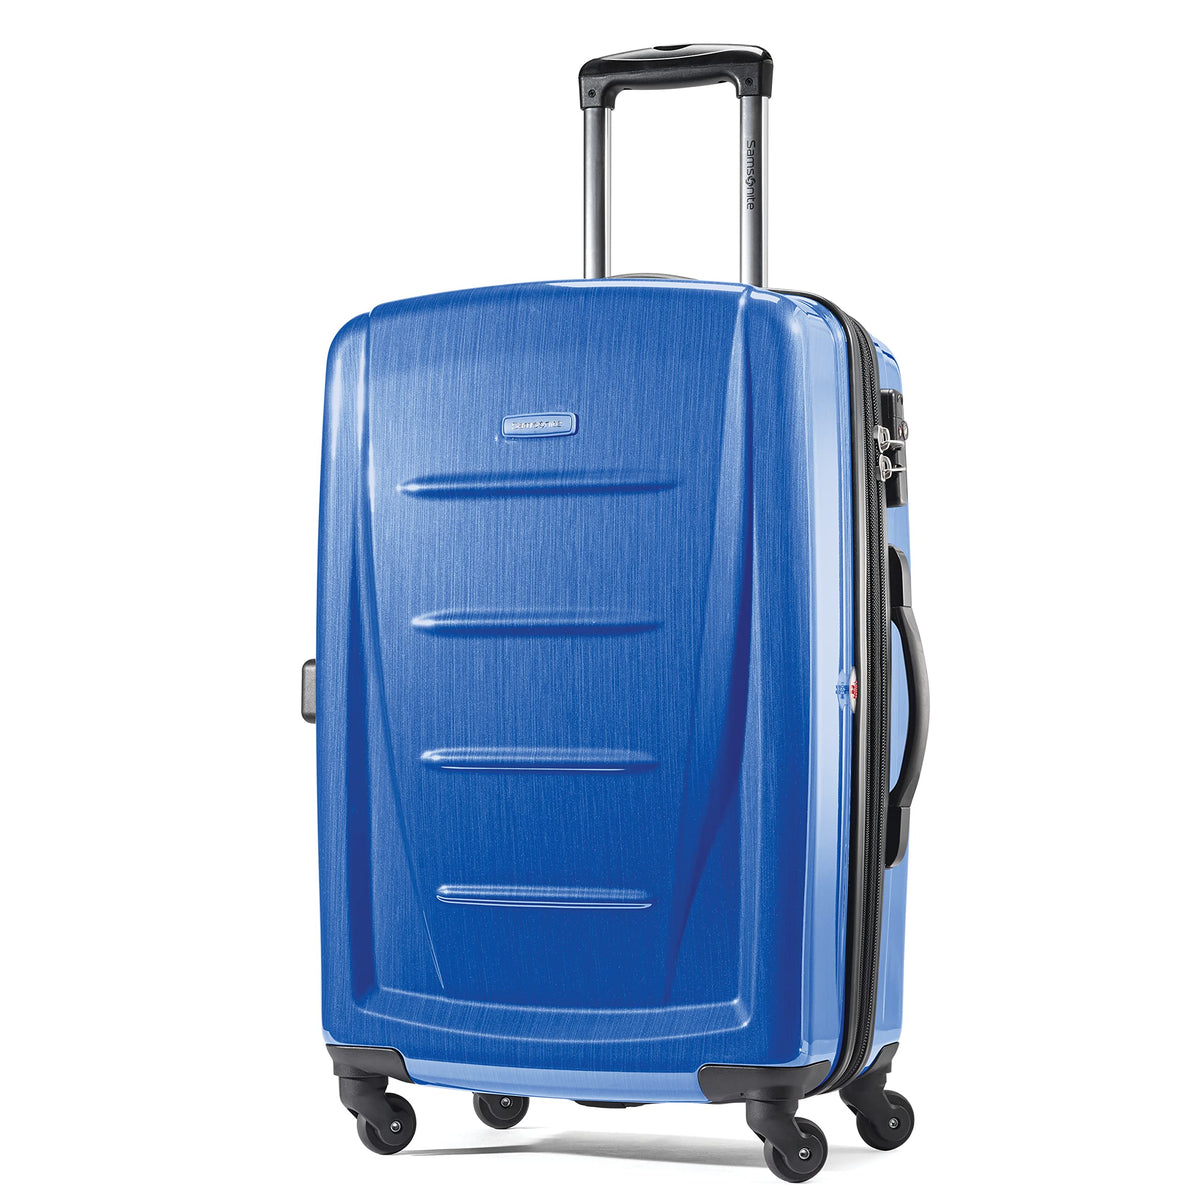 Samsonite Winfield 2 Hardside Luggage with Spinner Wheels - Nordic Blue/Checked-Medium 24-Inch